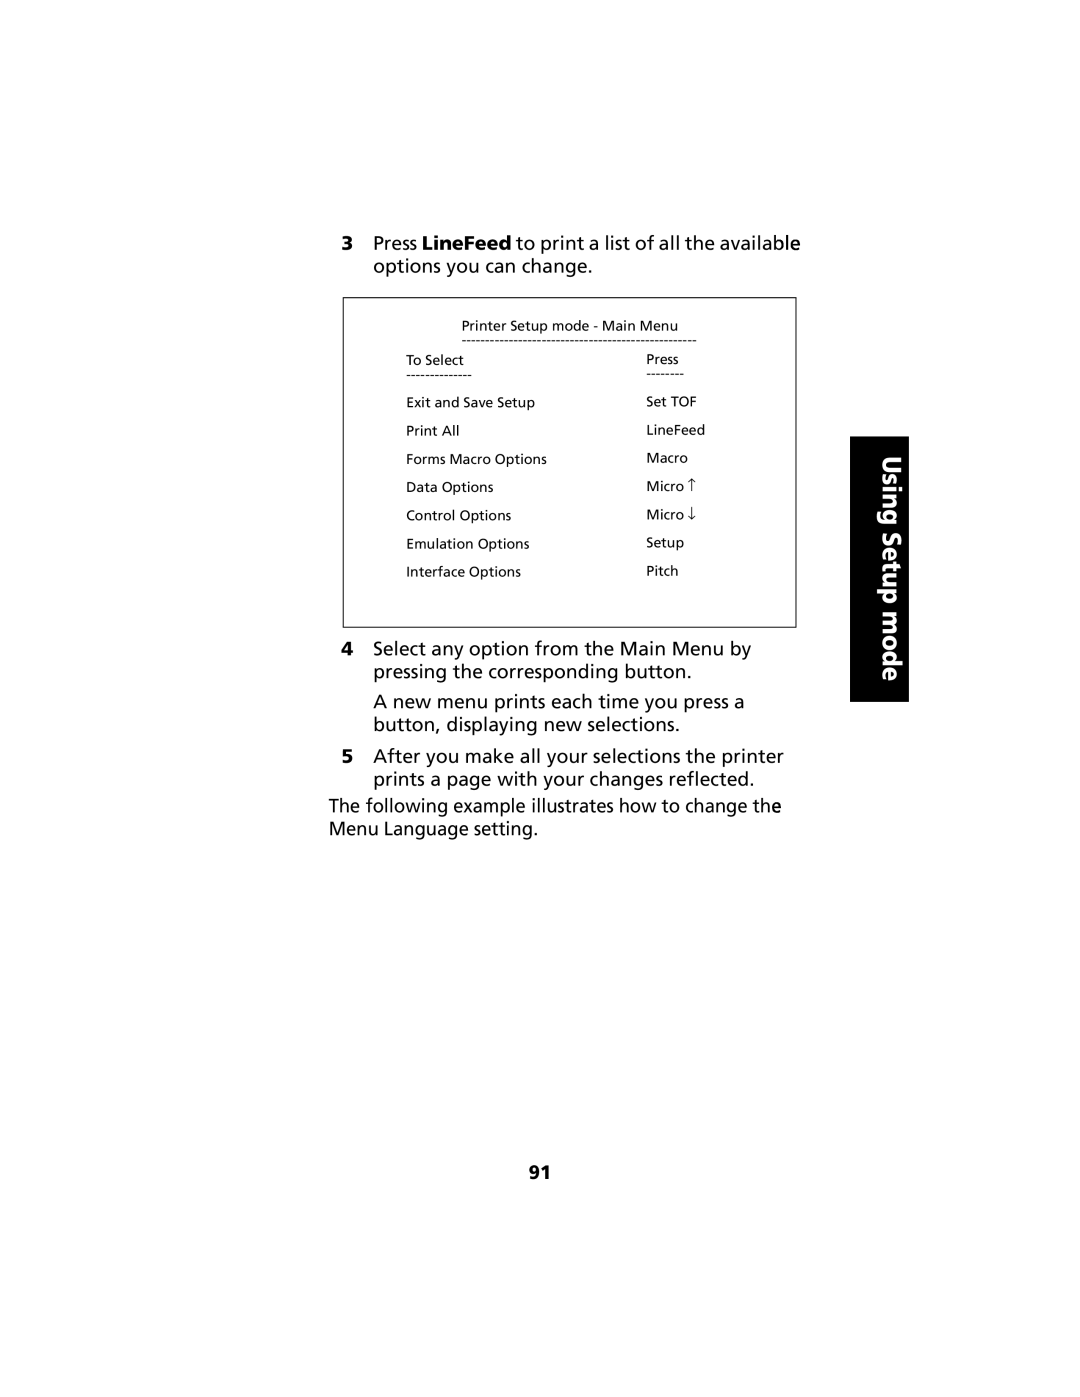 Lexmark 2480 manual Using Setup mode, Press LineFeed to print a list of all the available options you can change 